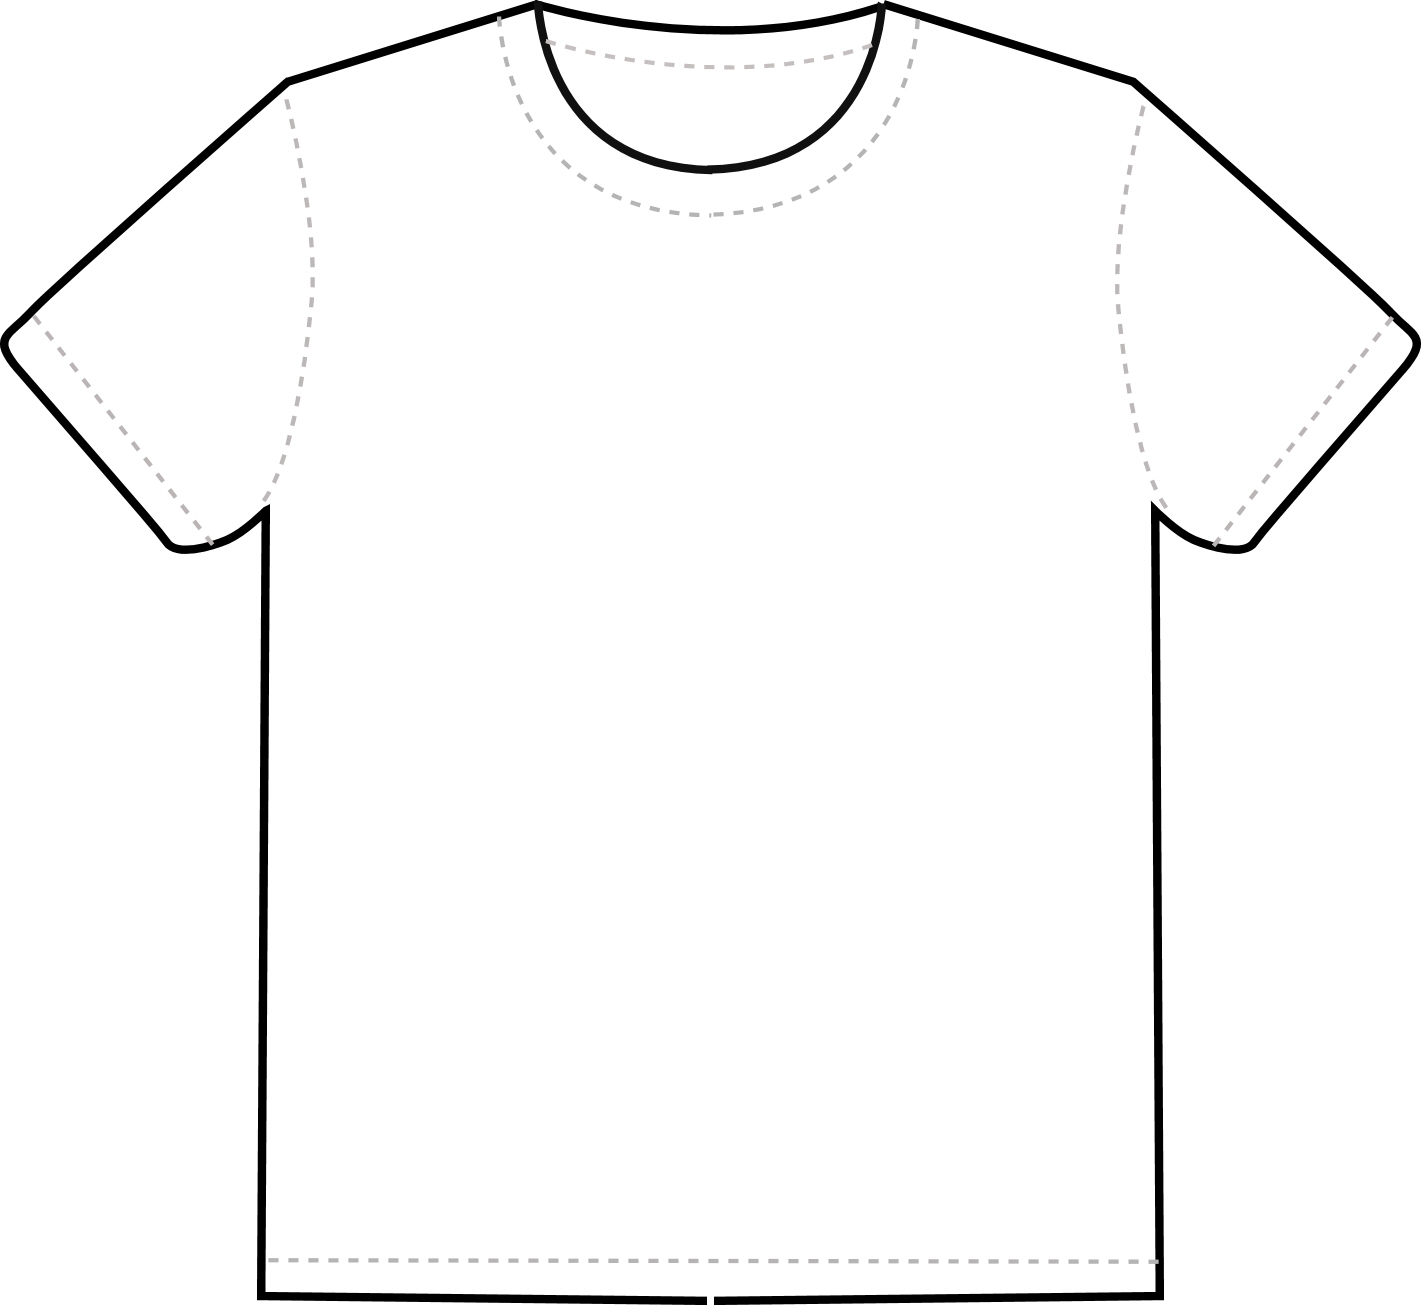 Free T Shirt Outline Template, Download Free Clip Art, Free.